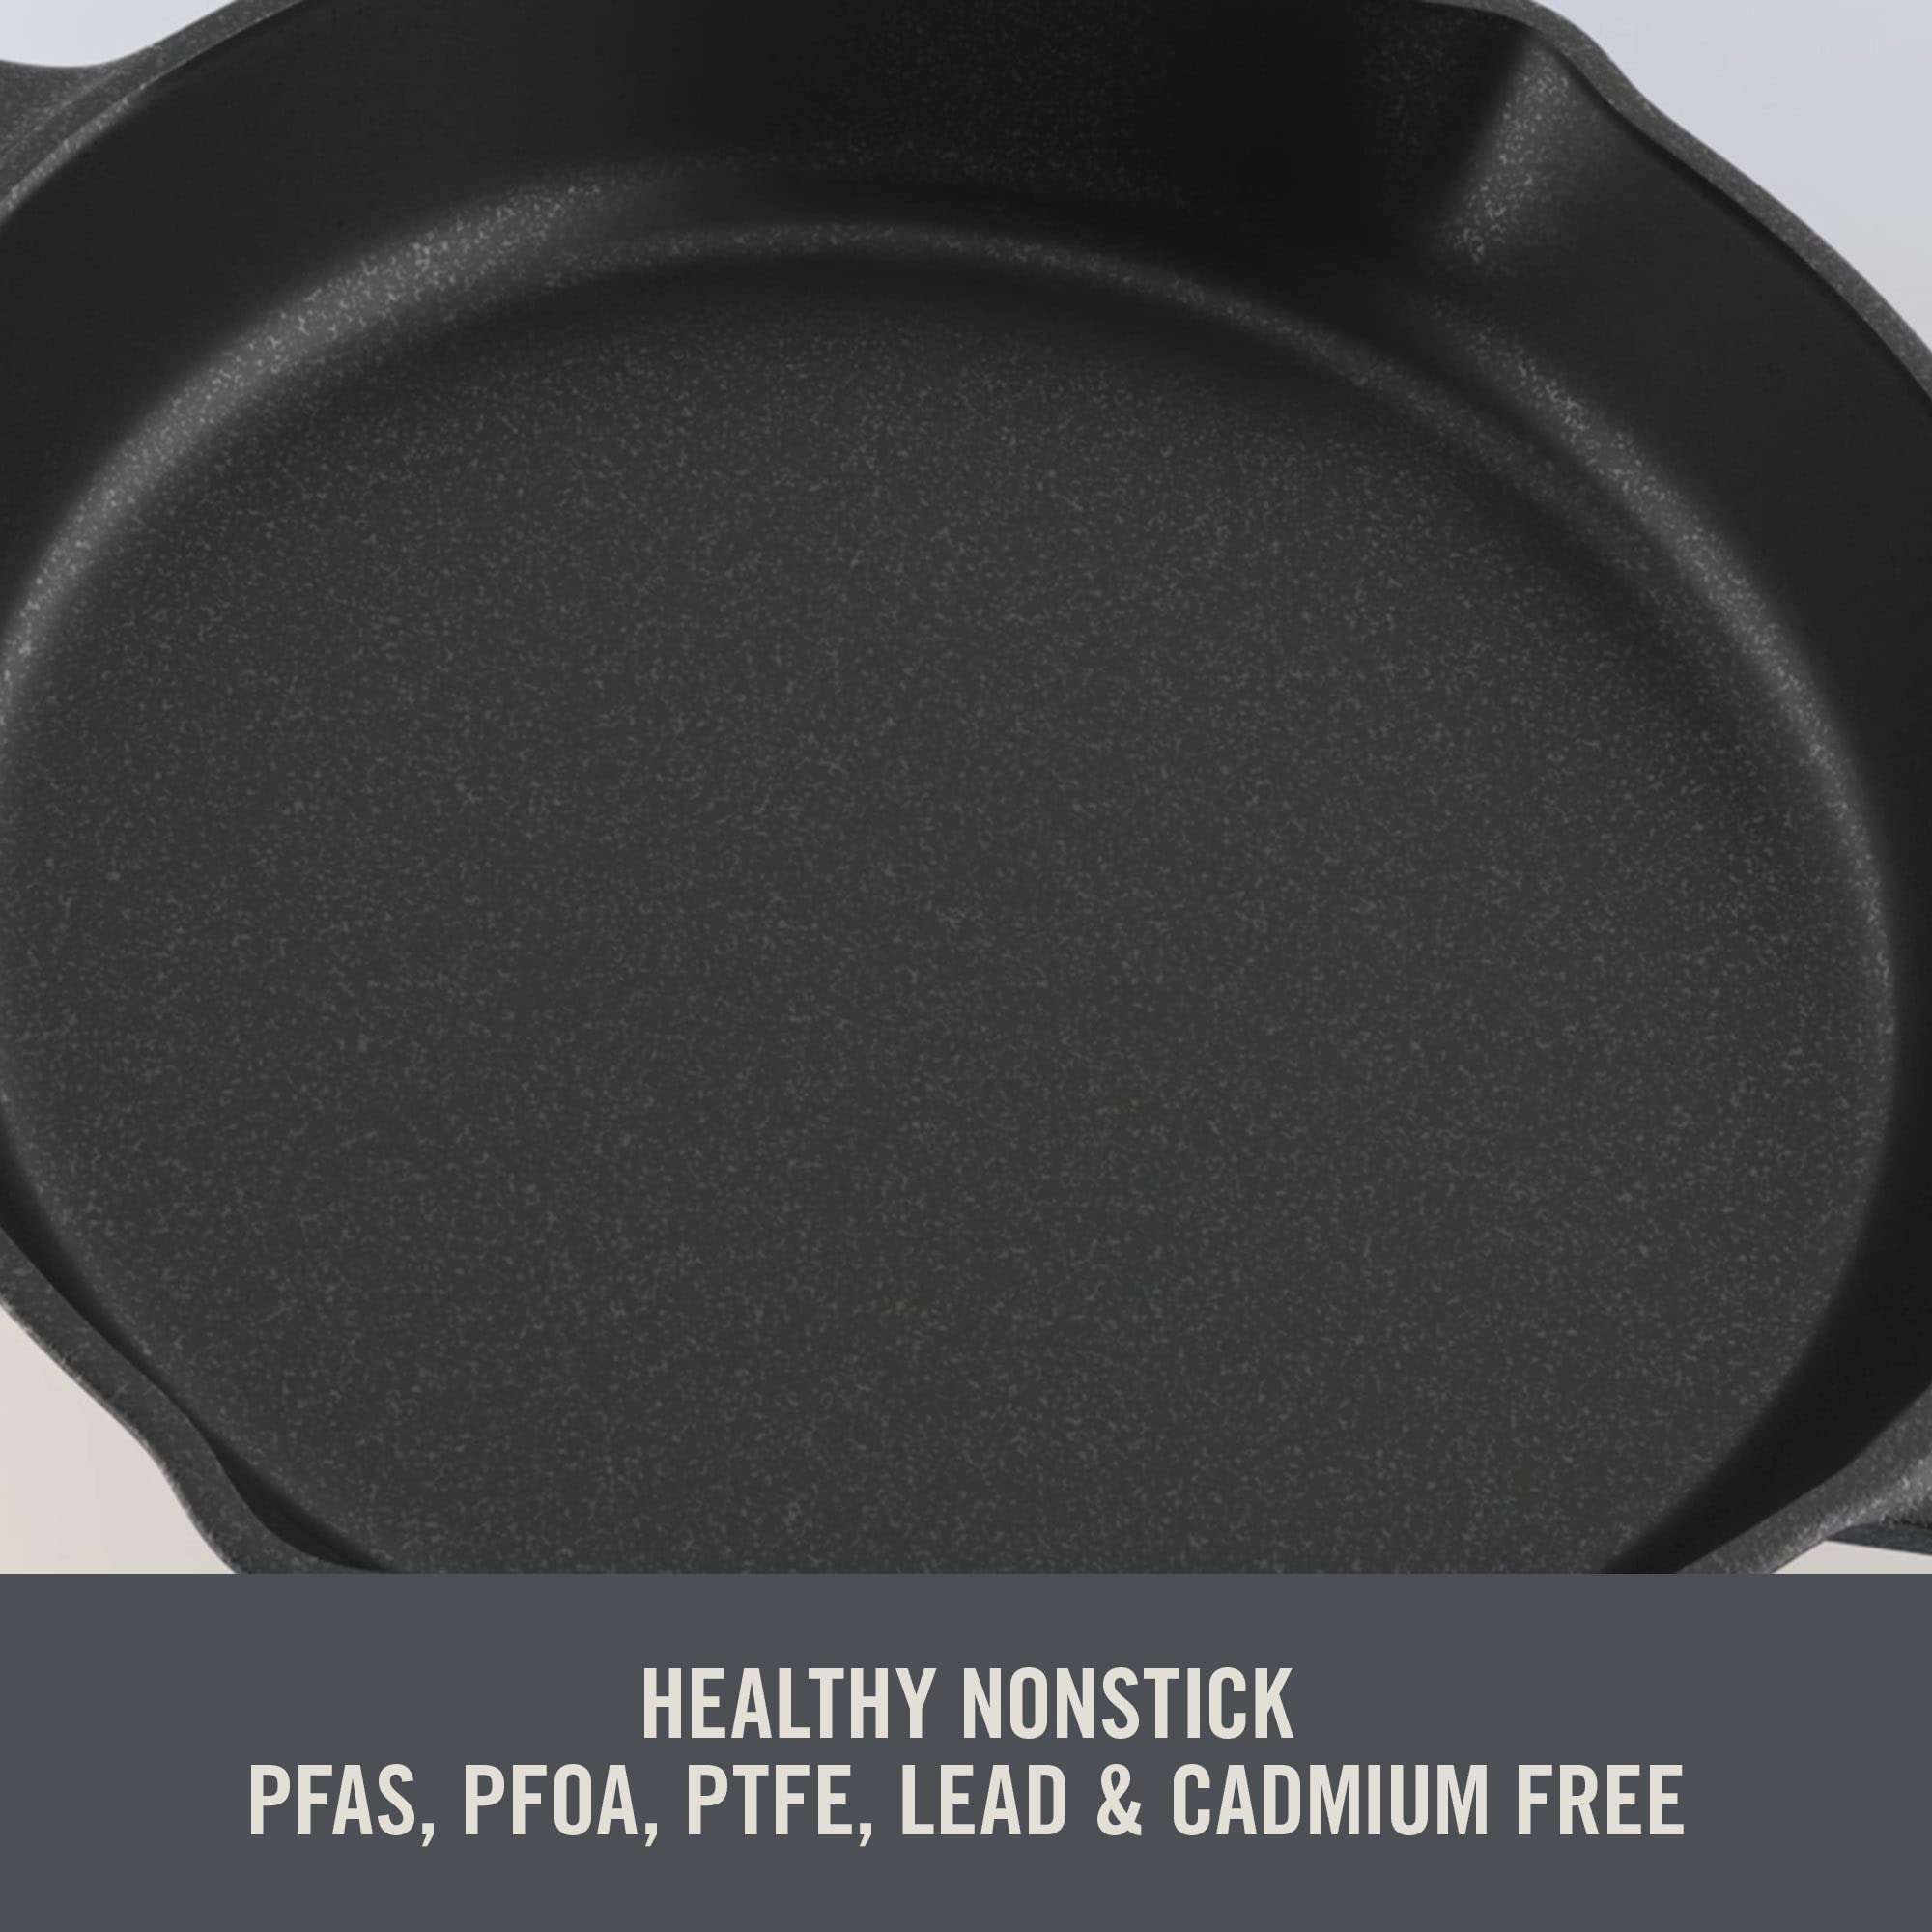 Zakarian By Dash 4.5QT Nonstick Cast Iron Deep Skillet with Cast Iron Lid for Family-Sized Meals, Frying, Roasting, Baking, One-Pot Meals and More - Blue